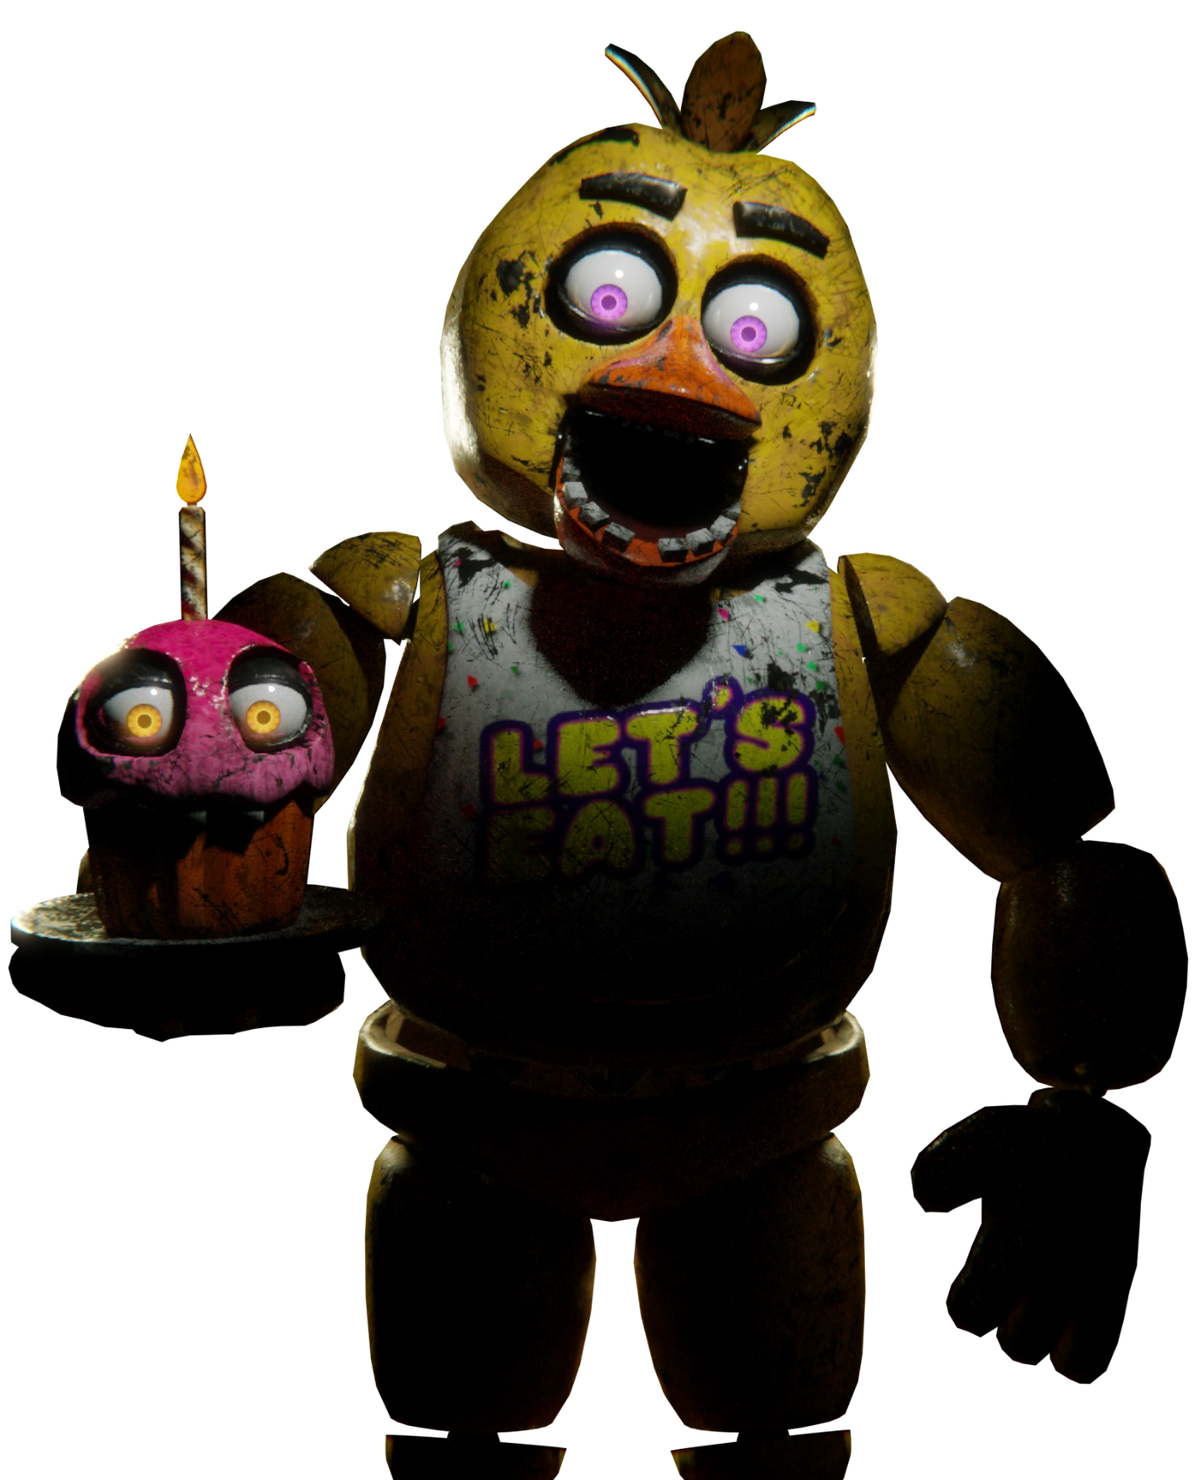 THE PRINCE OF PANACHE👽 on X: she can and will bake you cupcakes 🐥🐥 # witheredchica #chica #fnaf #fivenightsatfreddys #fnaf2 #ucn  #ultimatecustomnight #gijinka  / X